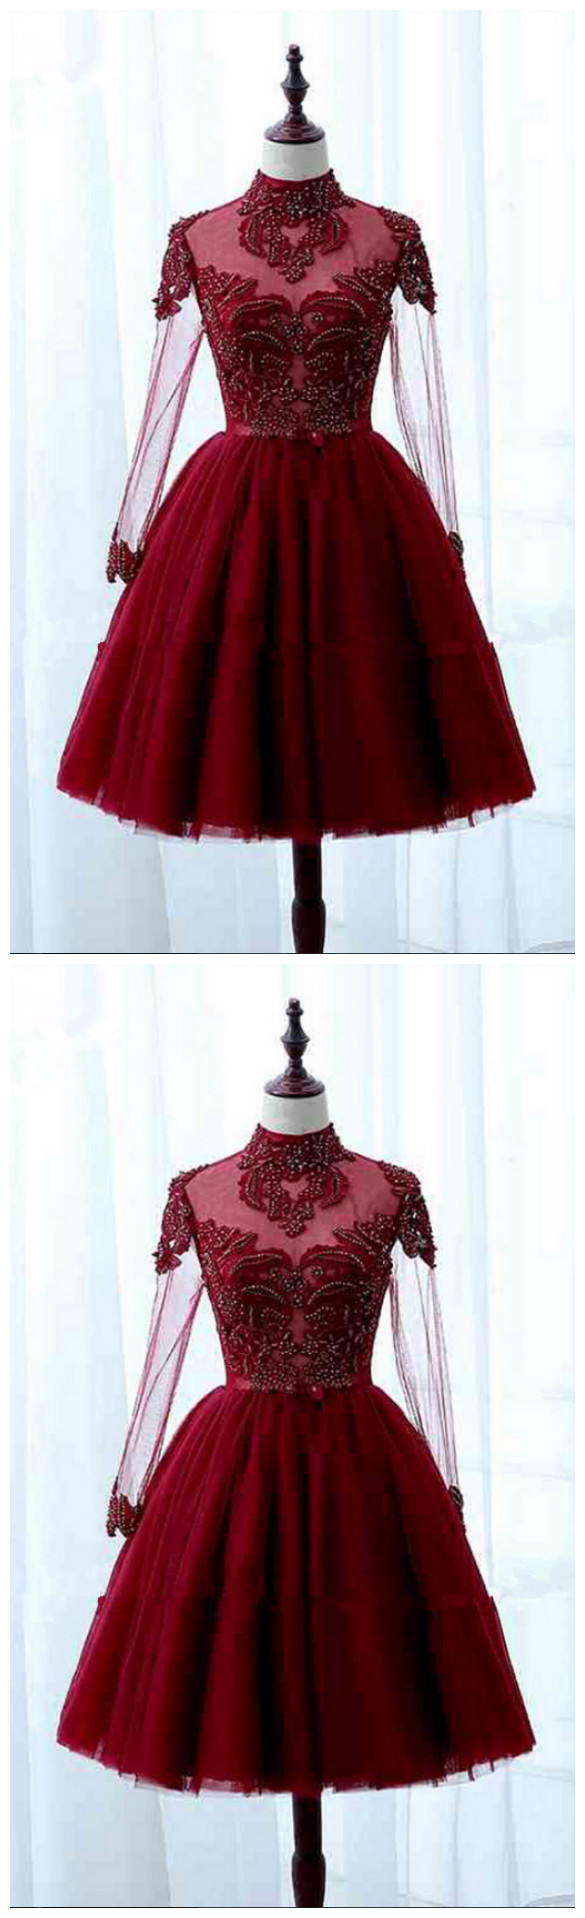 Design Neck Long Sleeve Homecoming Dresses,lace Up Open Knee Tiny Red Dress Cocktail ,homecoming Dress,party Dress